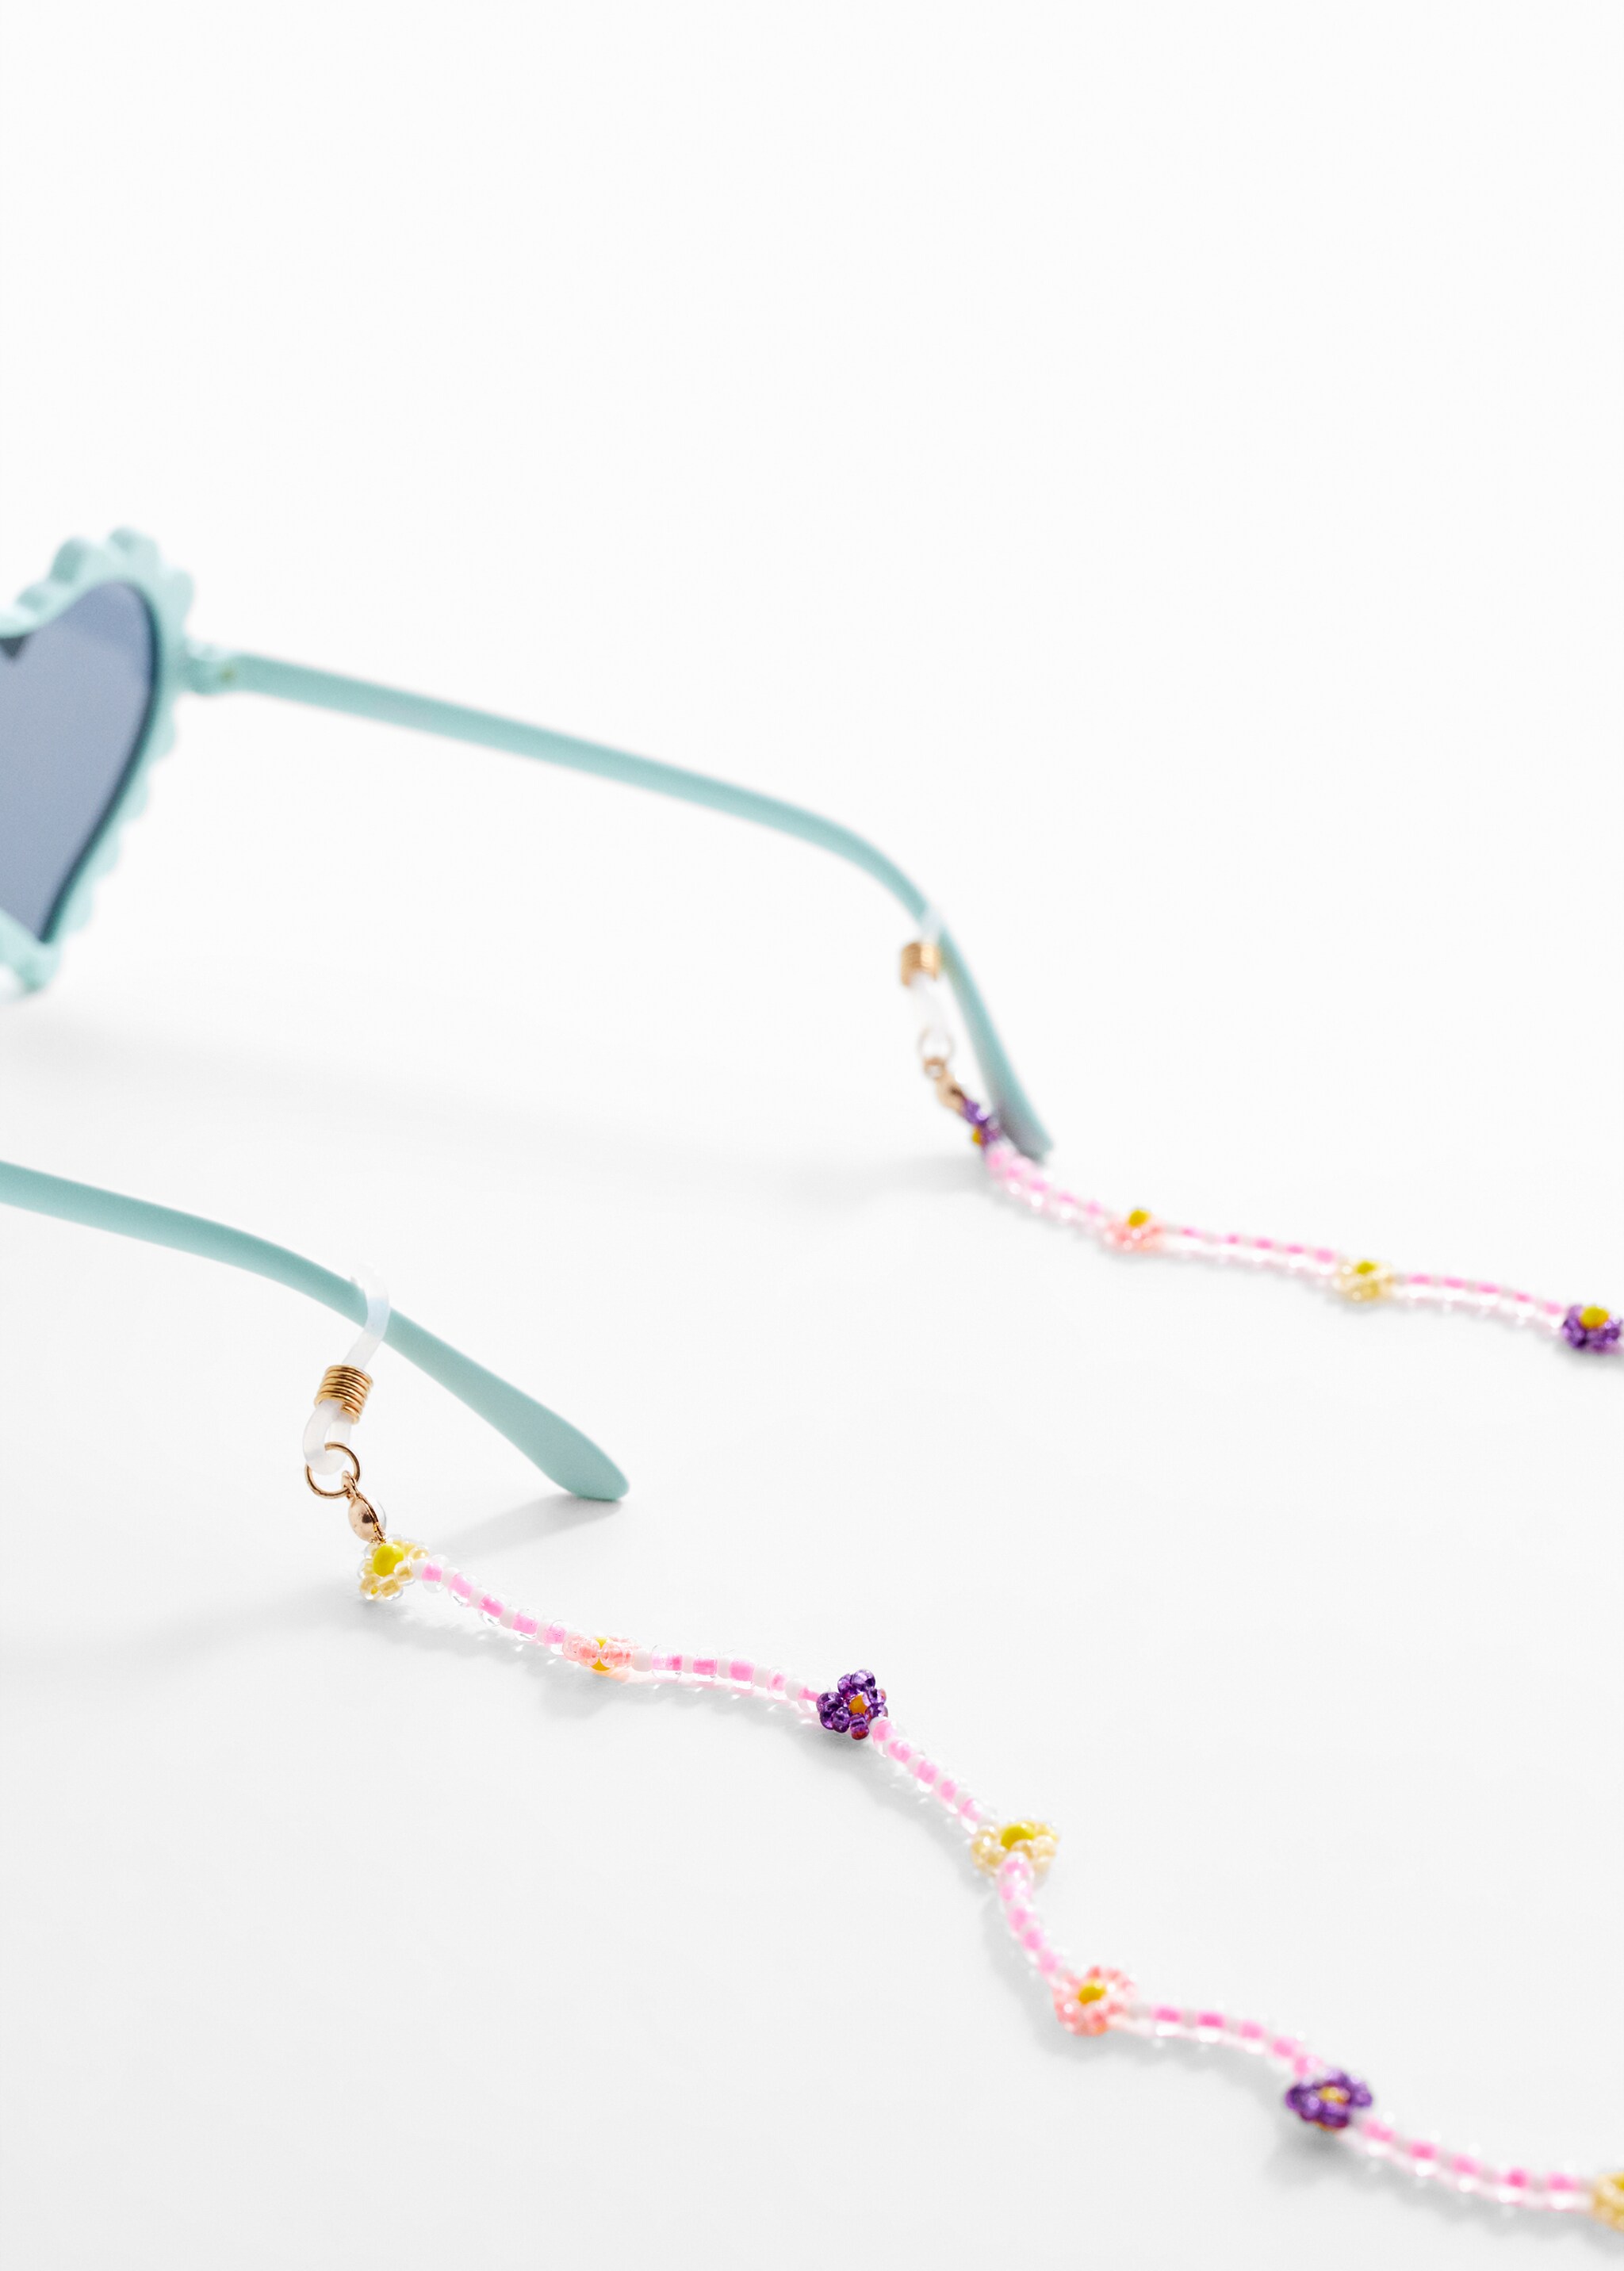 Floral glasses chain - Details of the article 1